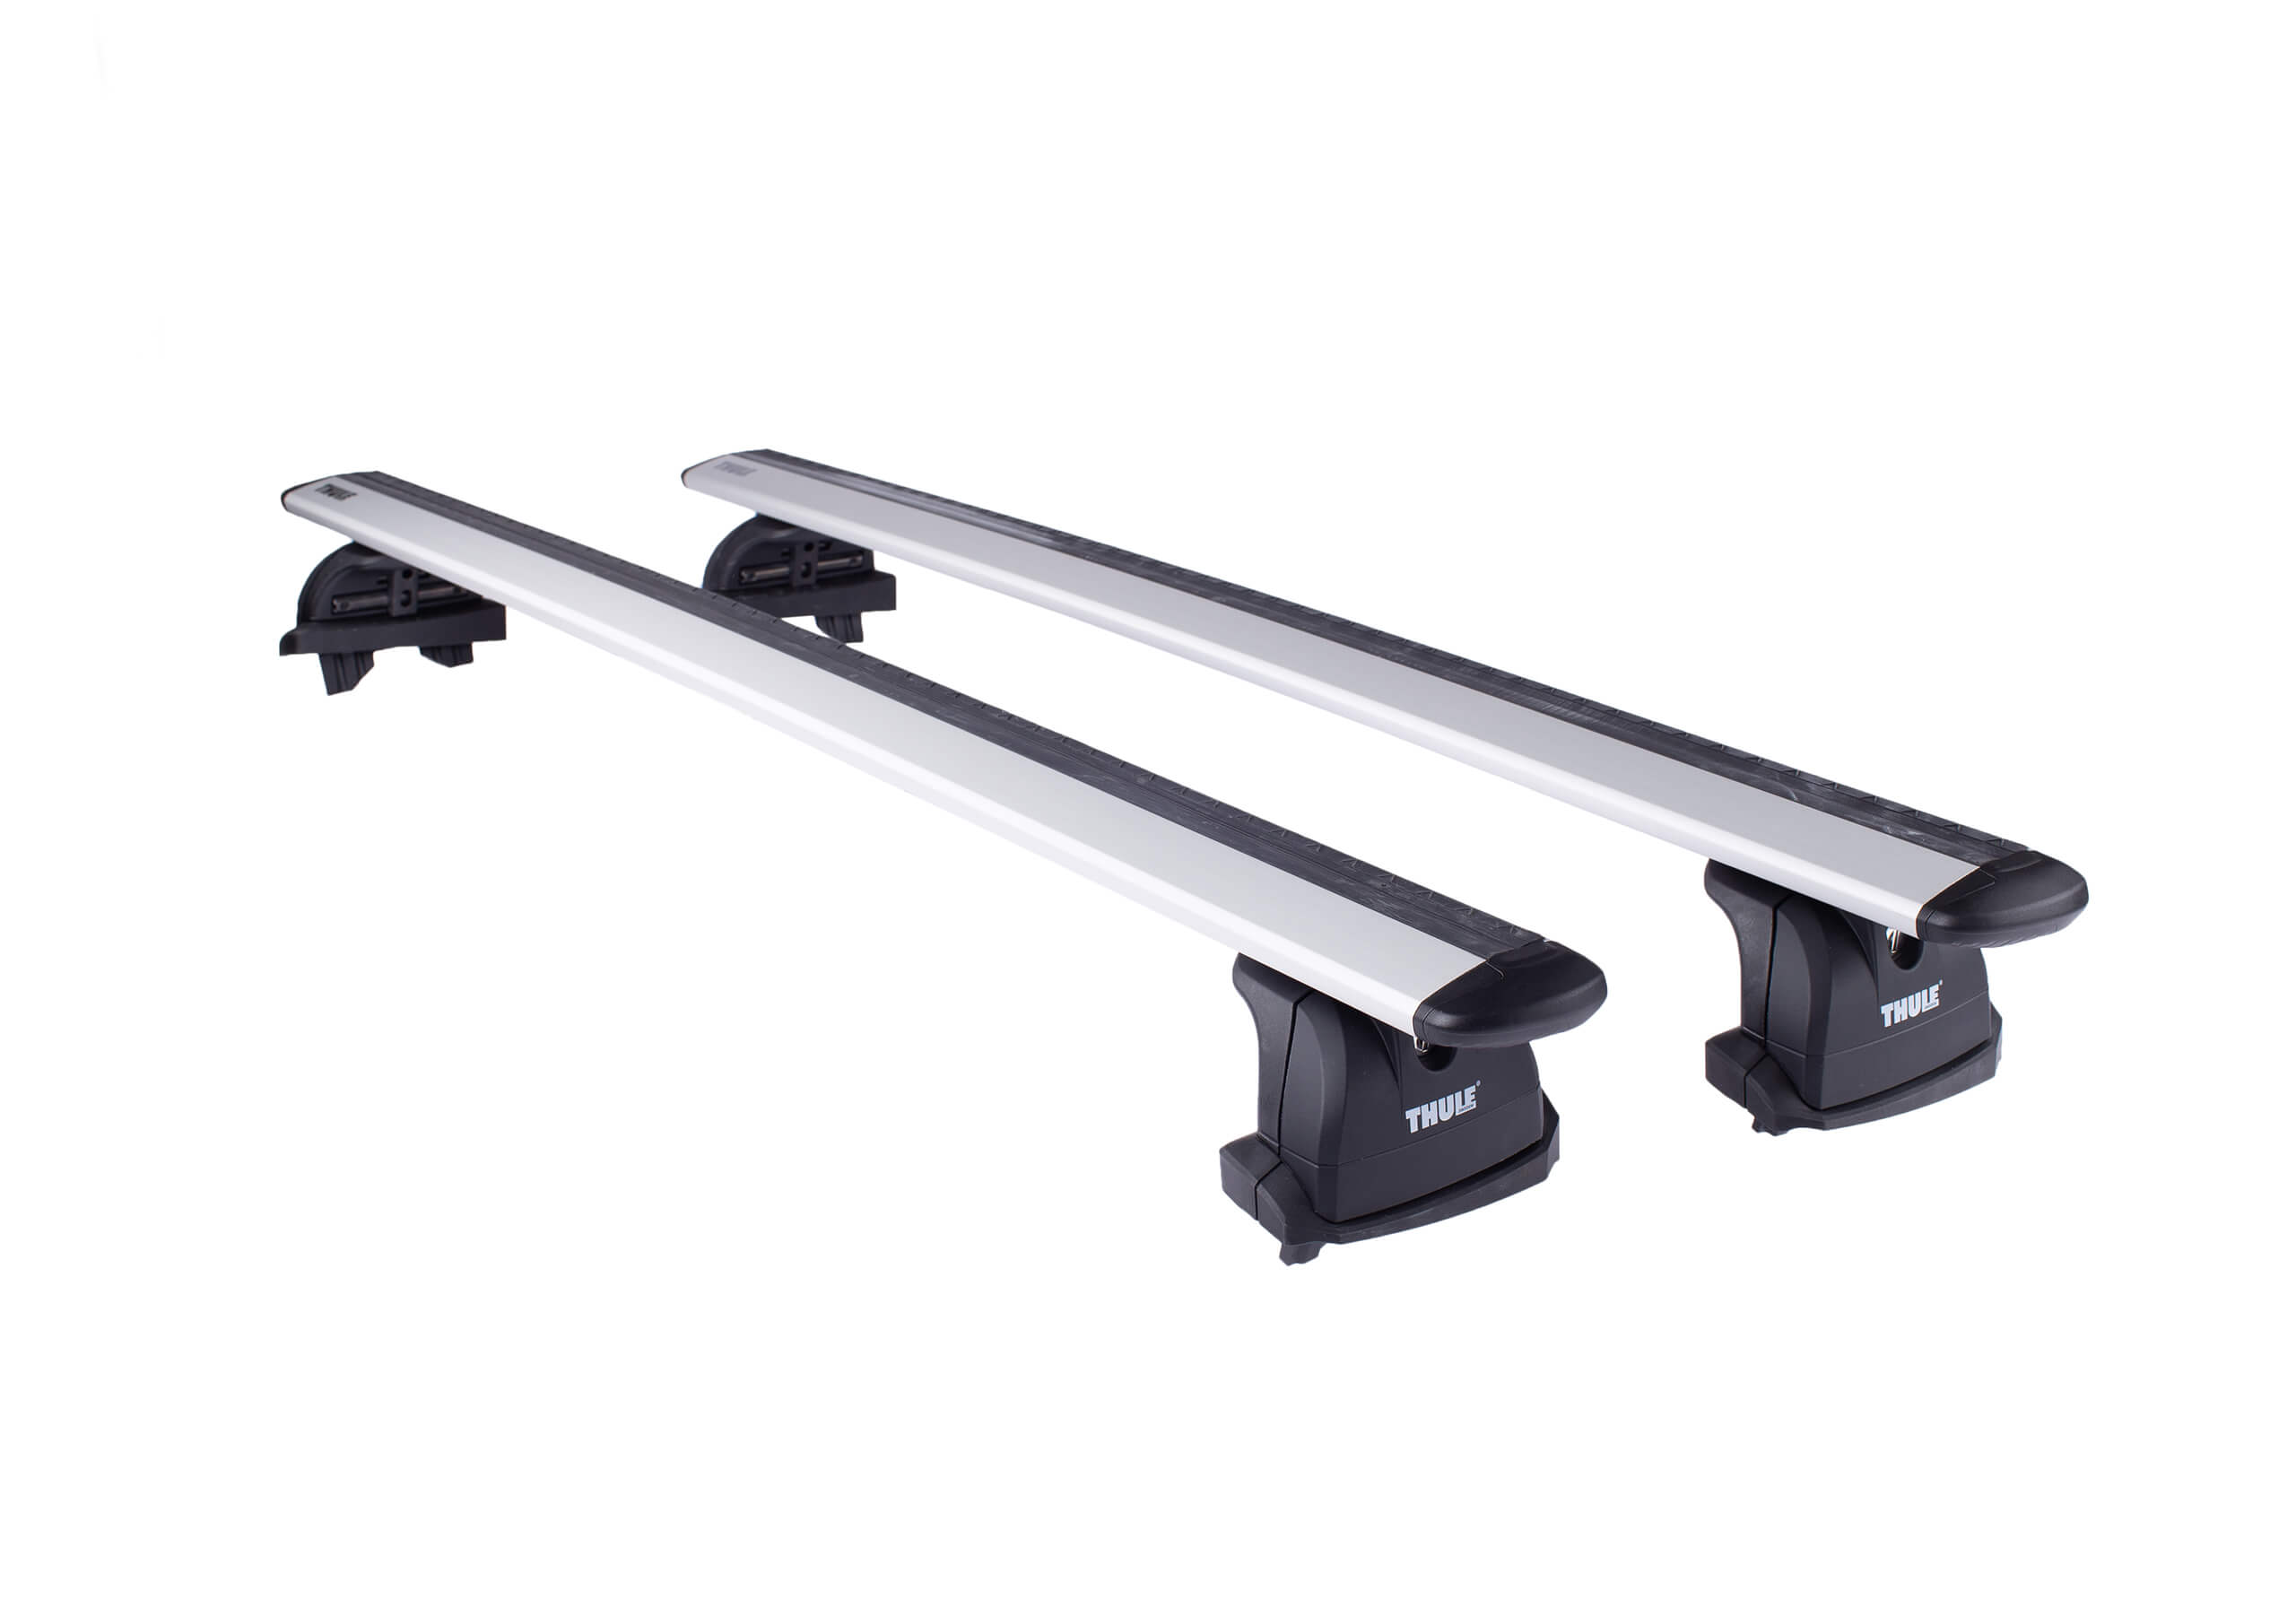 Fiat Doblo L1 (SWB) H1 (low roof) (2000 to 2010):Thule silver Evo WingBars package - 753, 7112, 3021